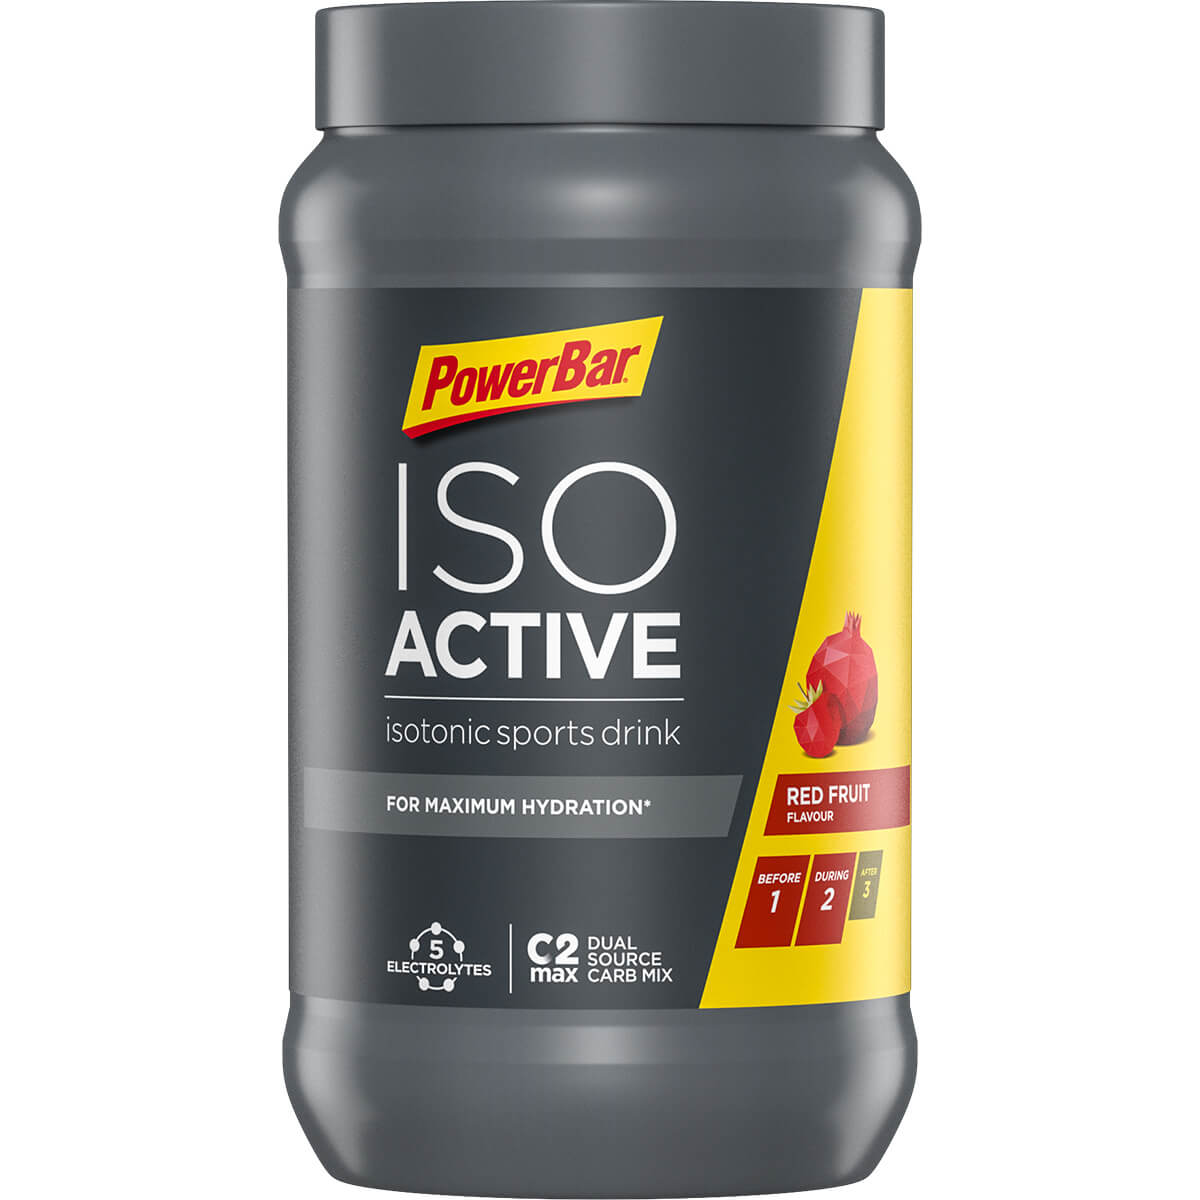 Sports drink, ISOACTIVE (600g)